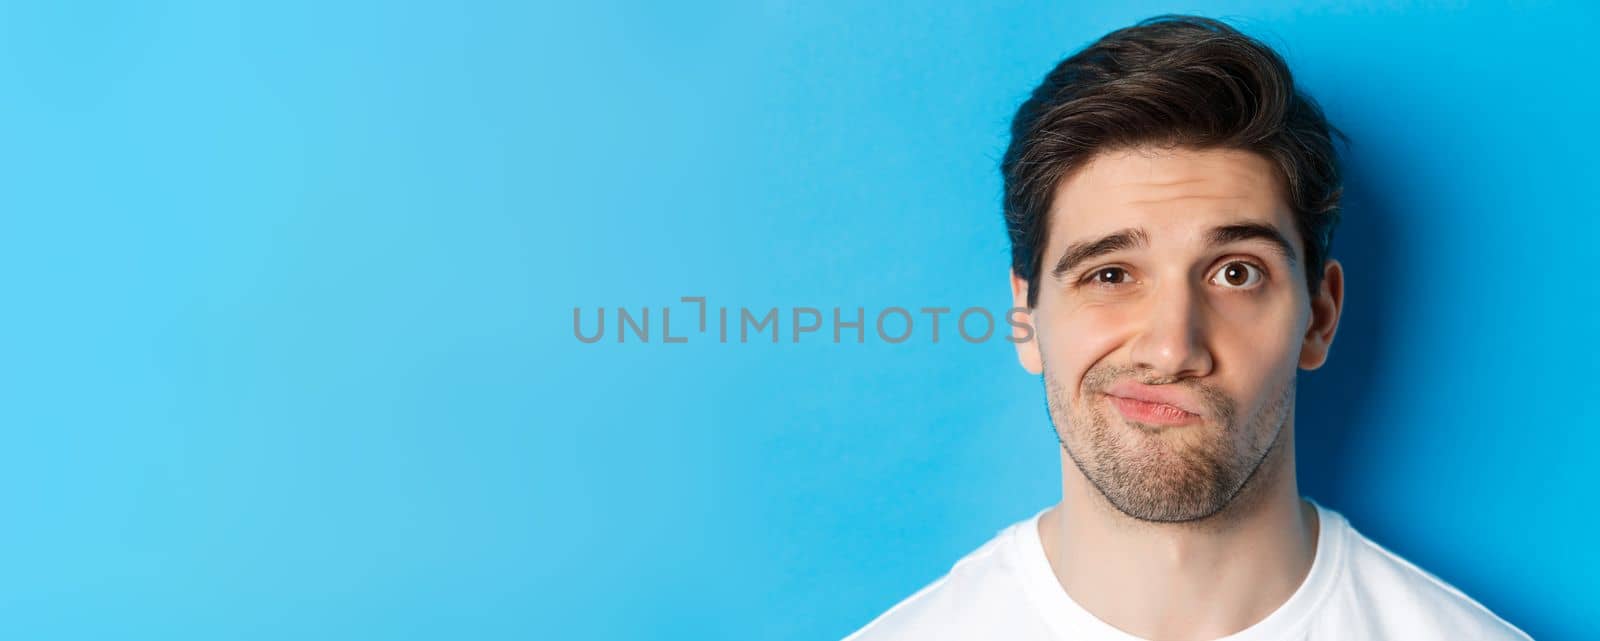 Headshot of skeptical guy looking at something unamusing, grimacing and standing reluctant against blue background.